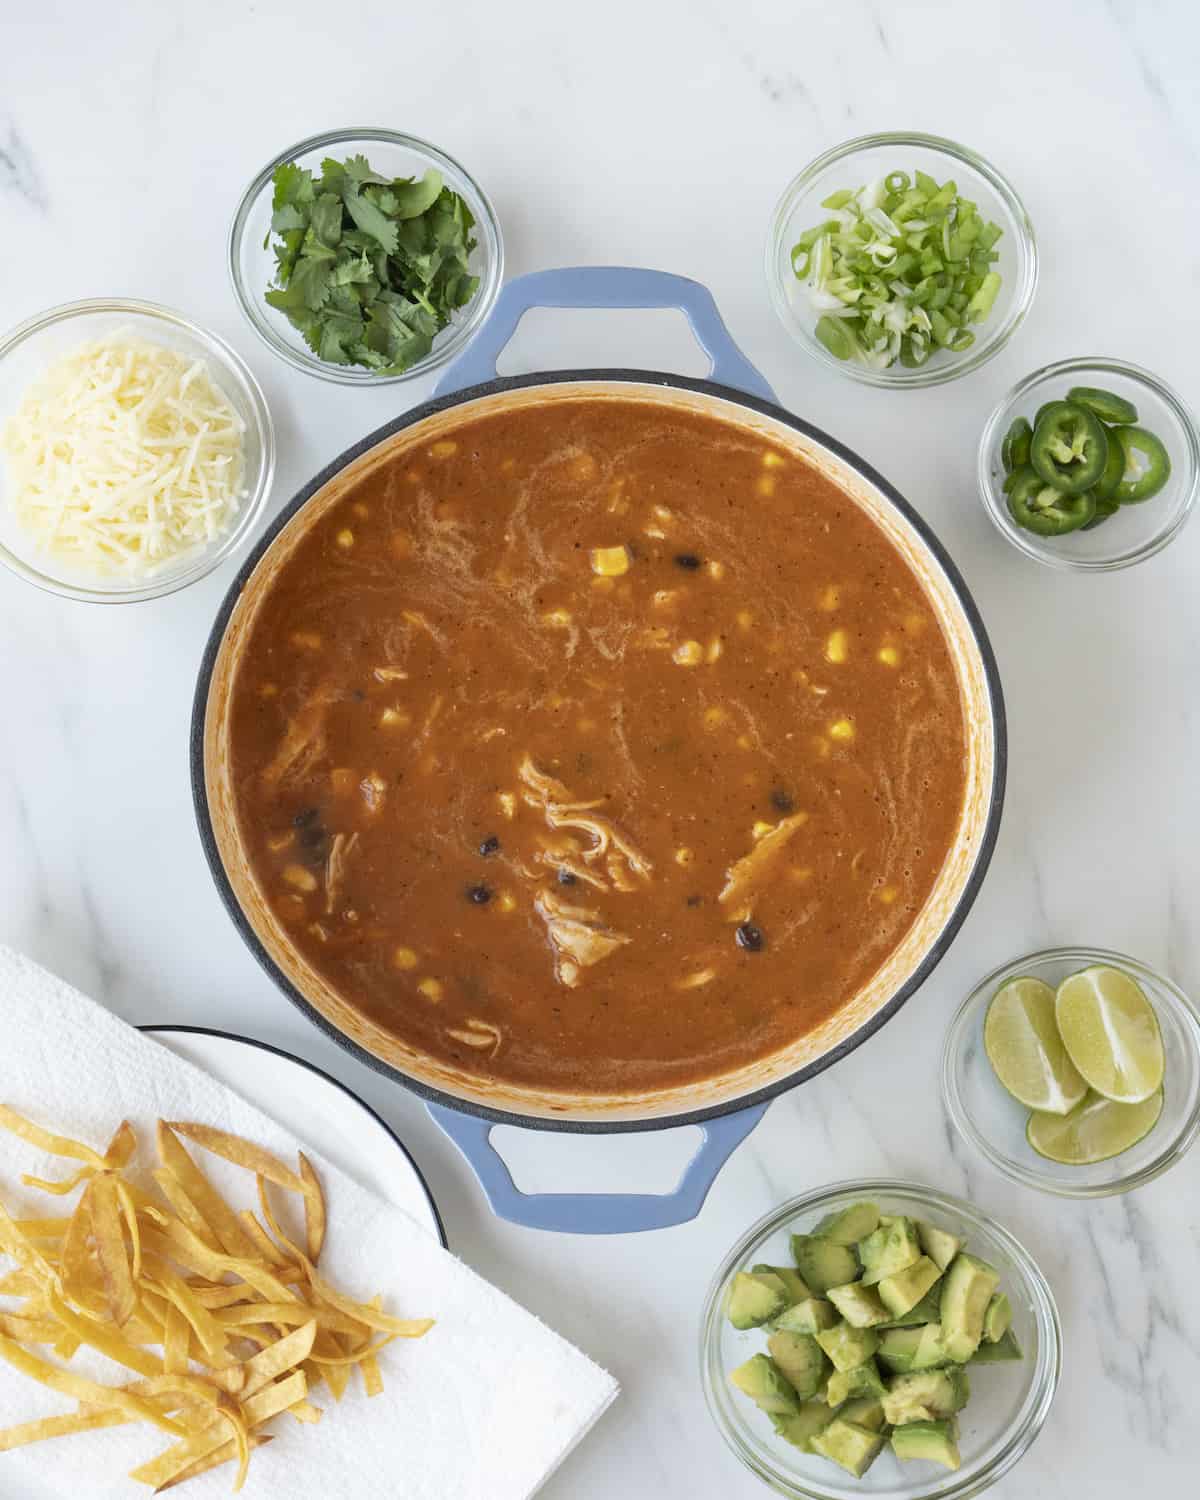 A blue saucepan with completed chicken tortilla soup recipe surrounded by clear bowls of ingredient toppings such as cheese and cilantro in top left corner, a plate of fried tortilla strips in lower left corner, clear bowls of green onion and jalapeños in top right corner, and clear bowls of 3 lime wedges and cubed avocado in lower right corner on a white countertop.